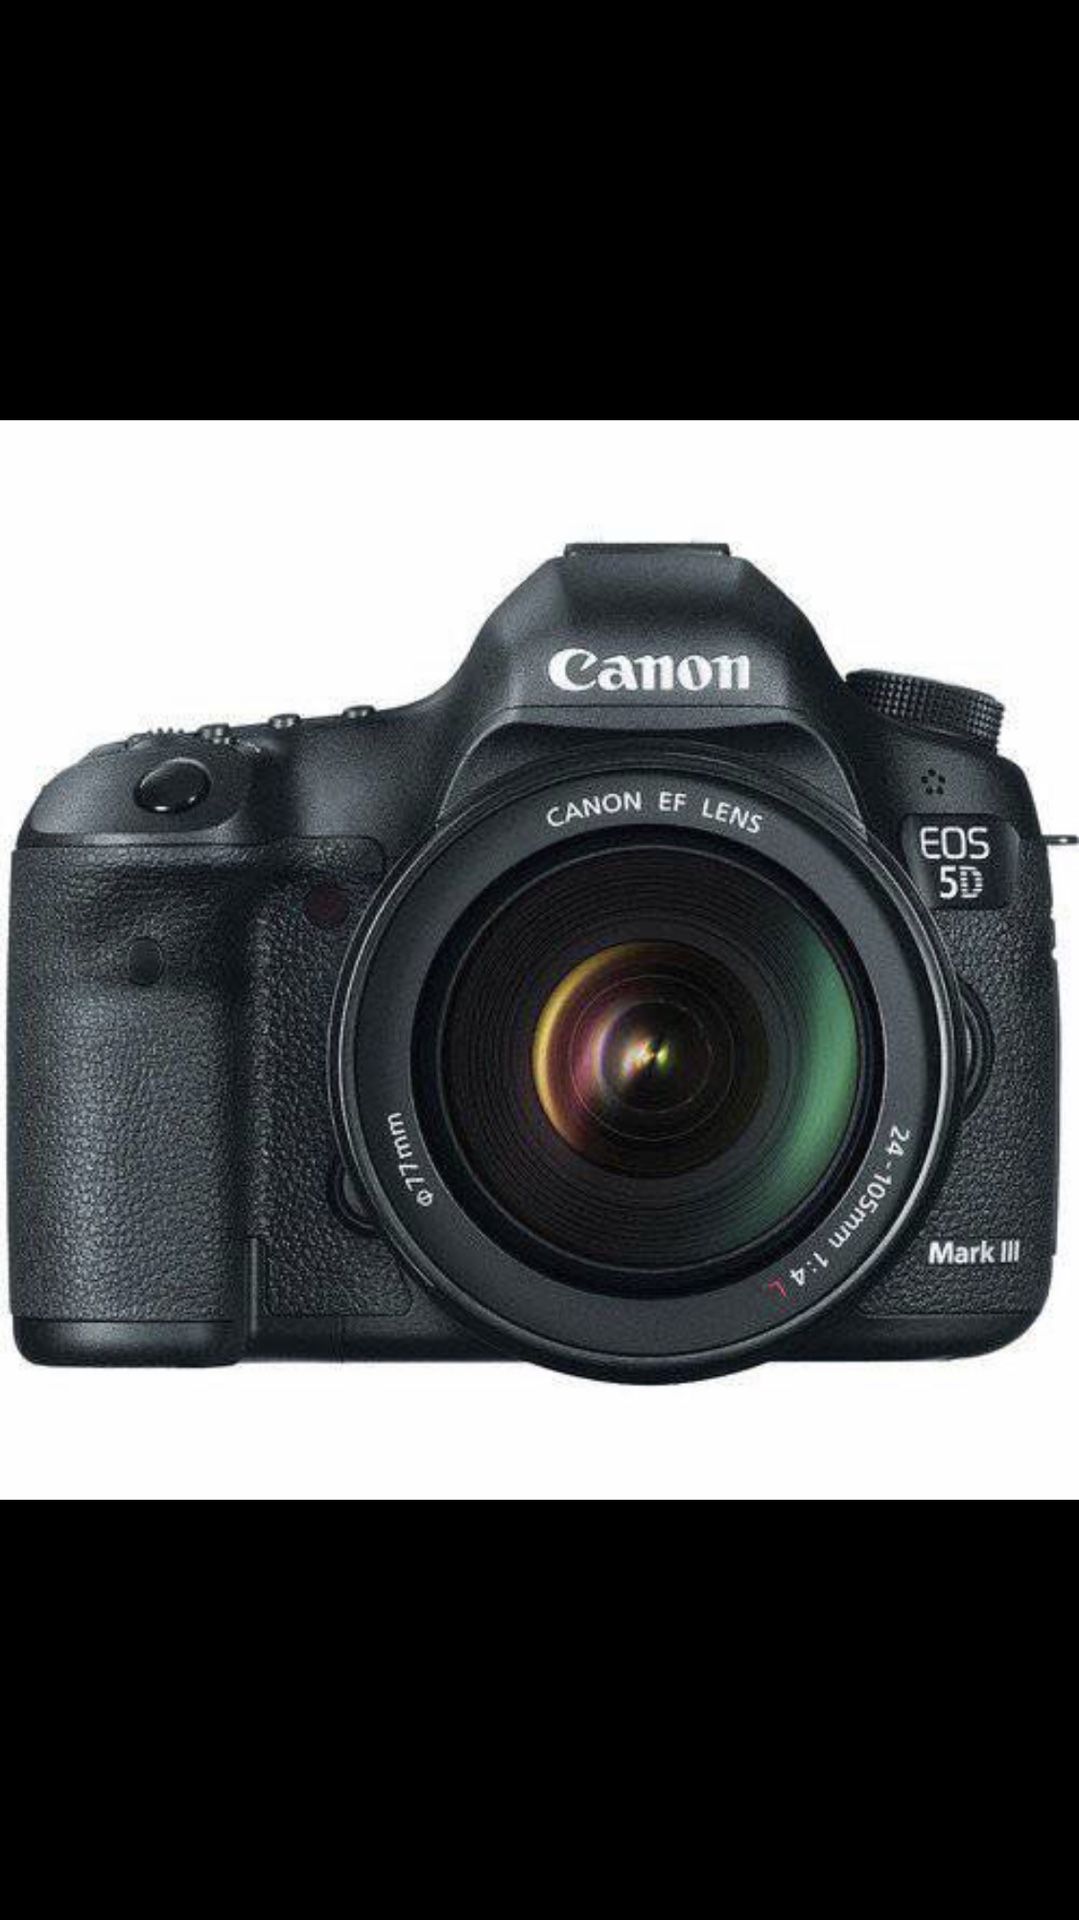 CANNON 5D MARK III CAMERA ................................NO SHIPPING!!! If you see this add that means I still have it!